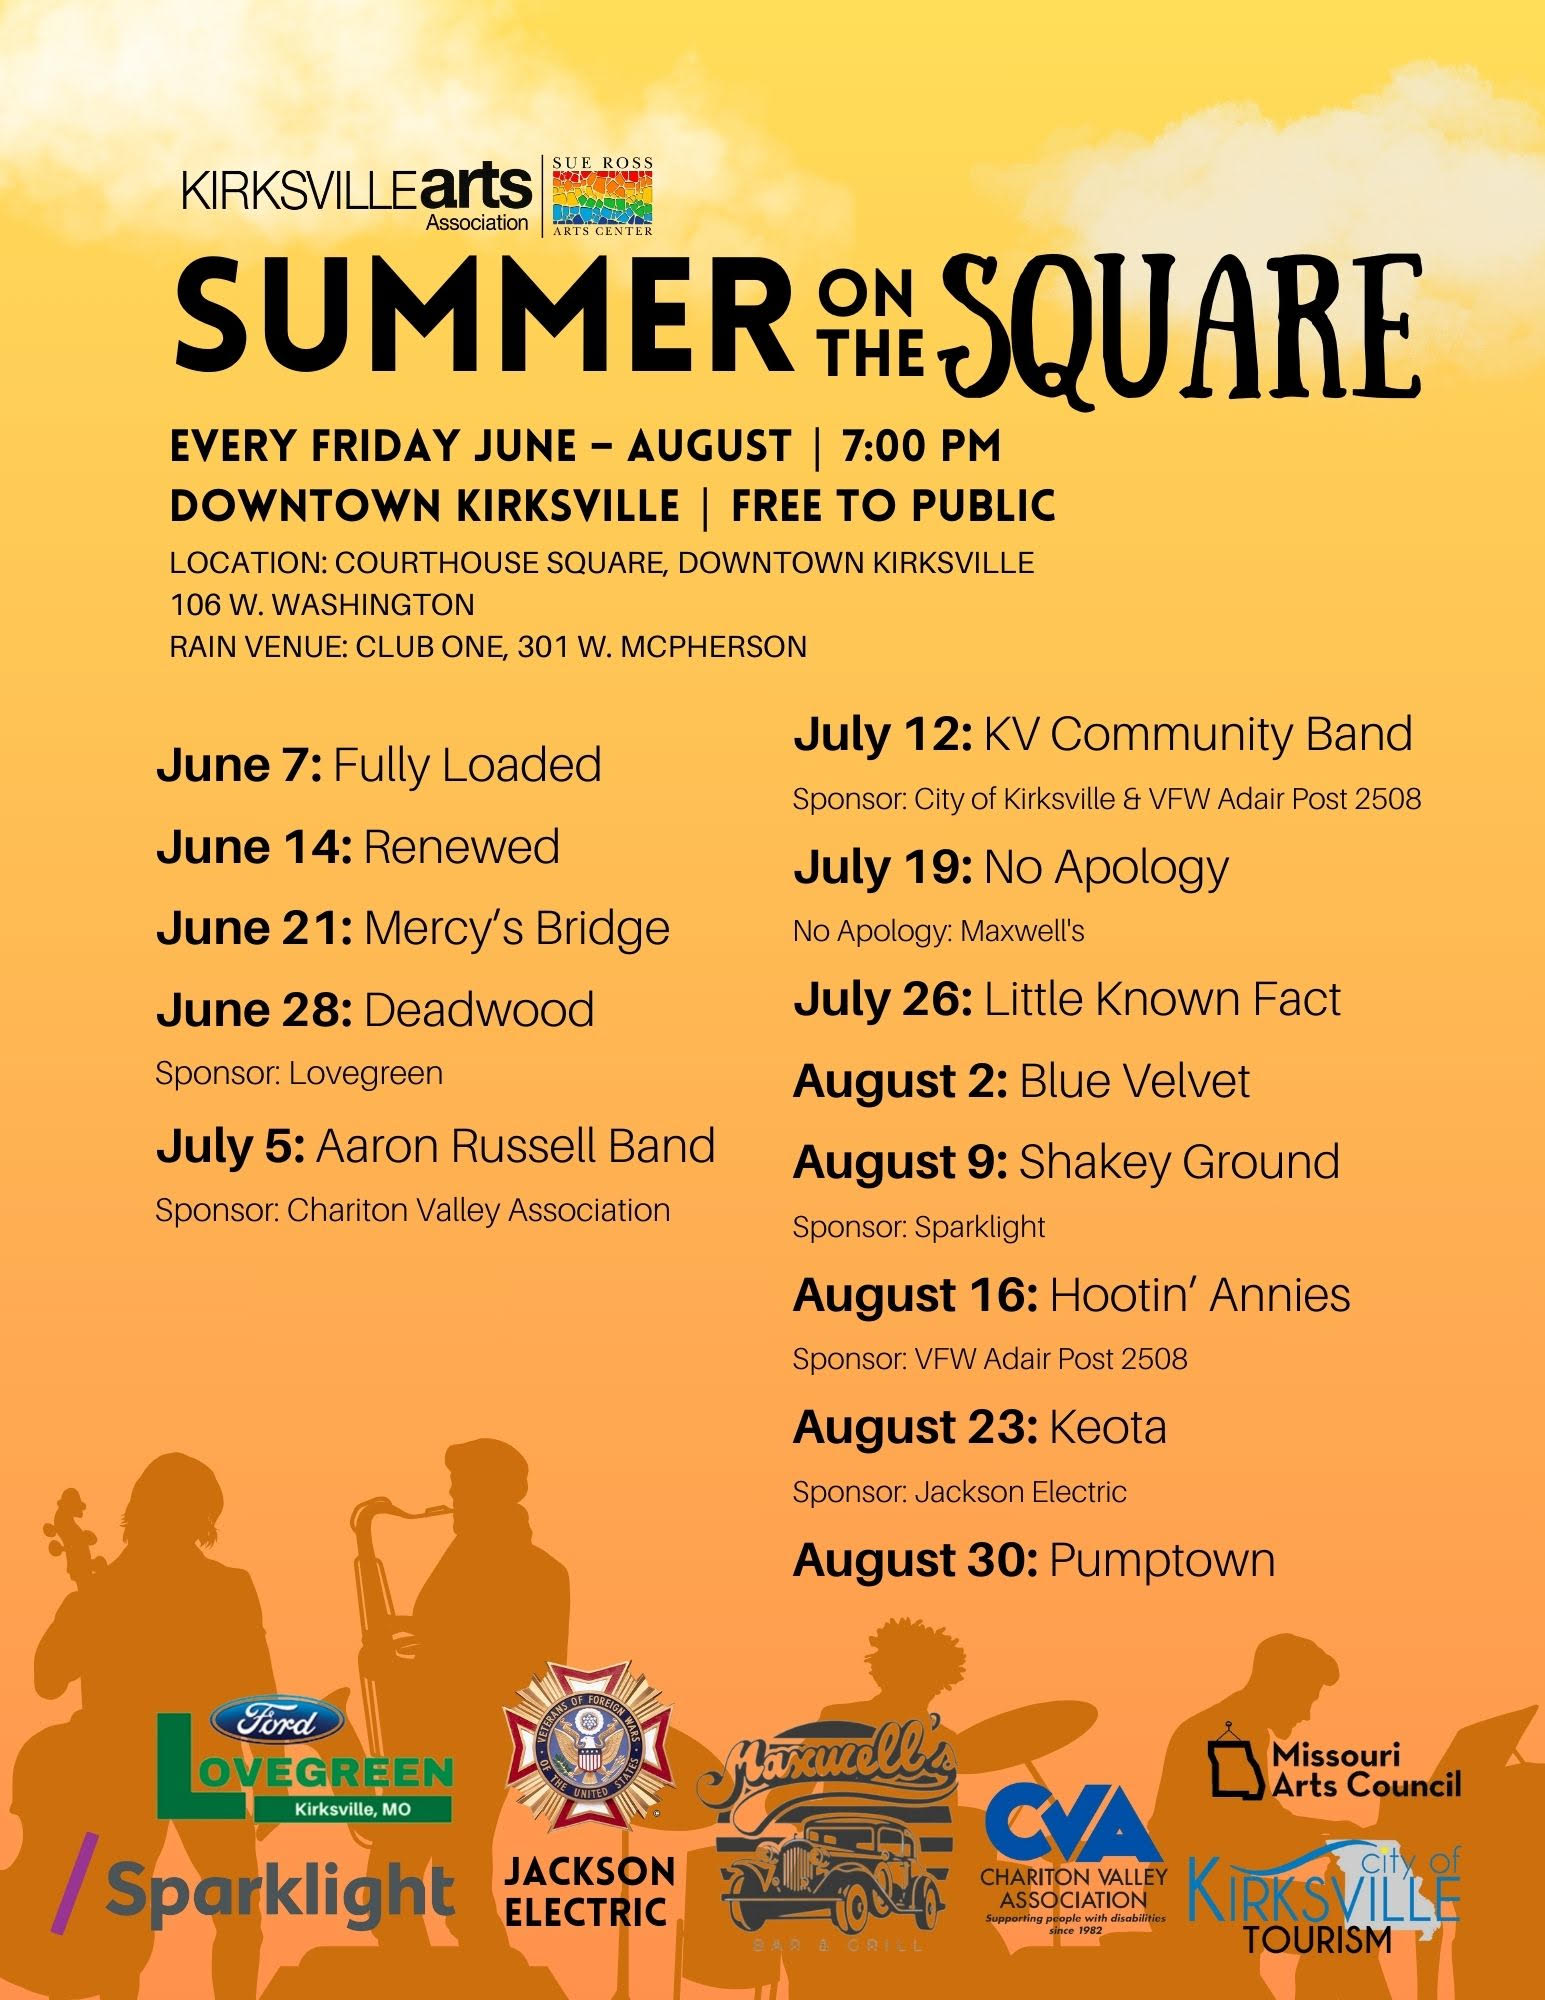 Check more about Kirksville Arts Association Summer on the Square – Free Concert Series - Blue Velvet